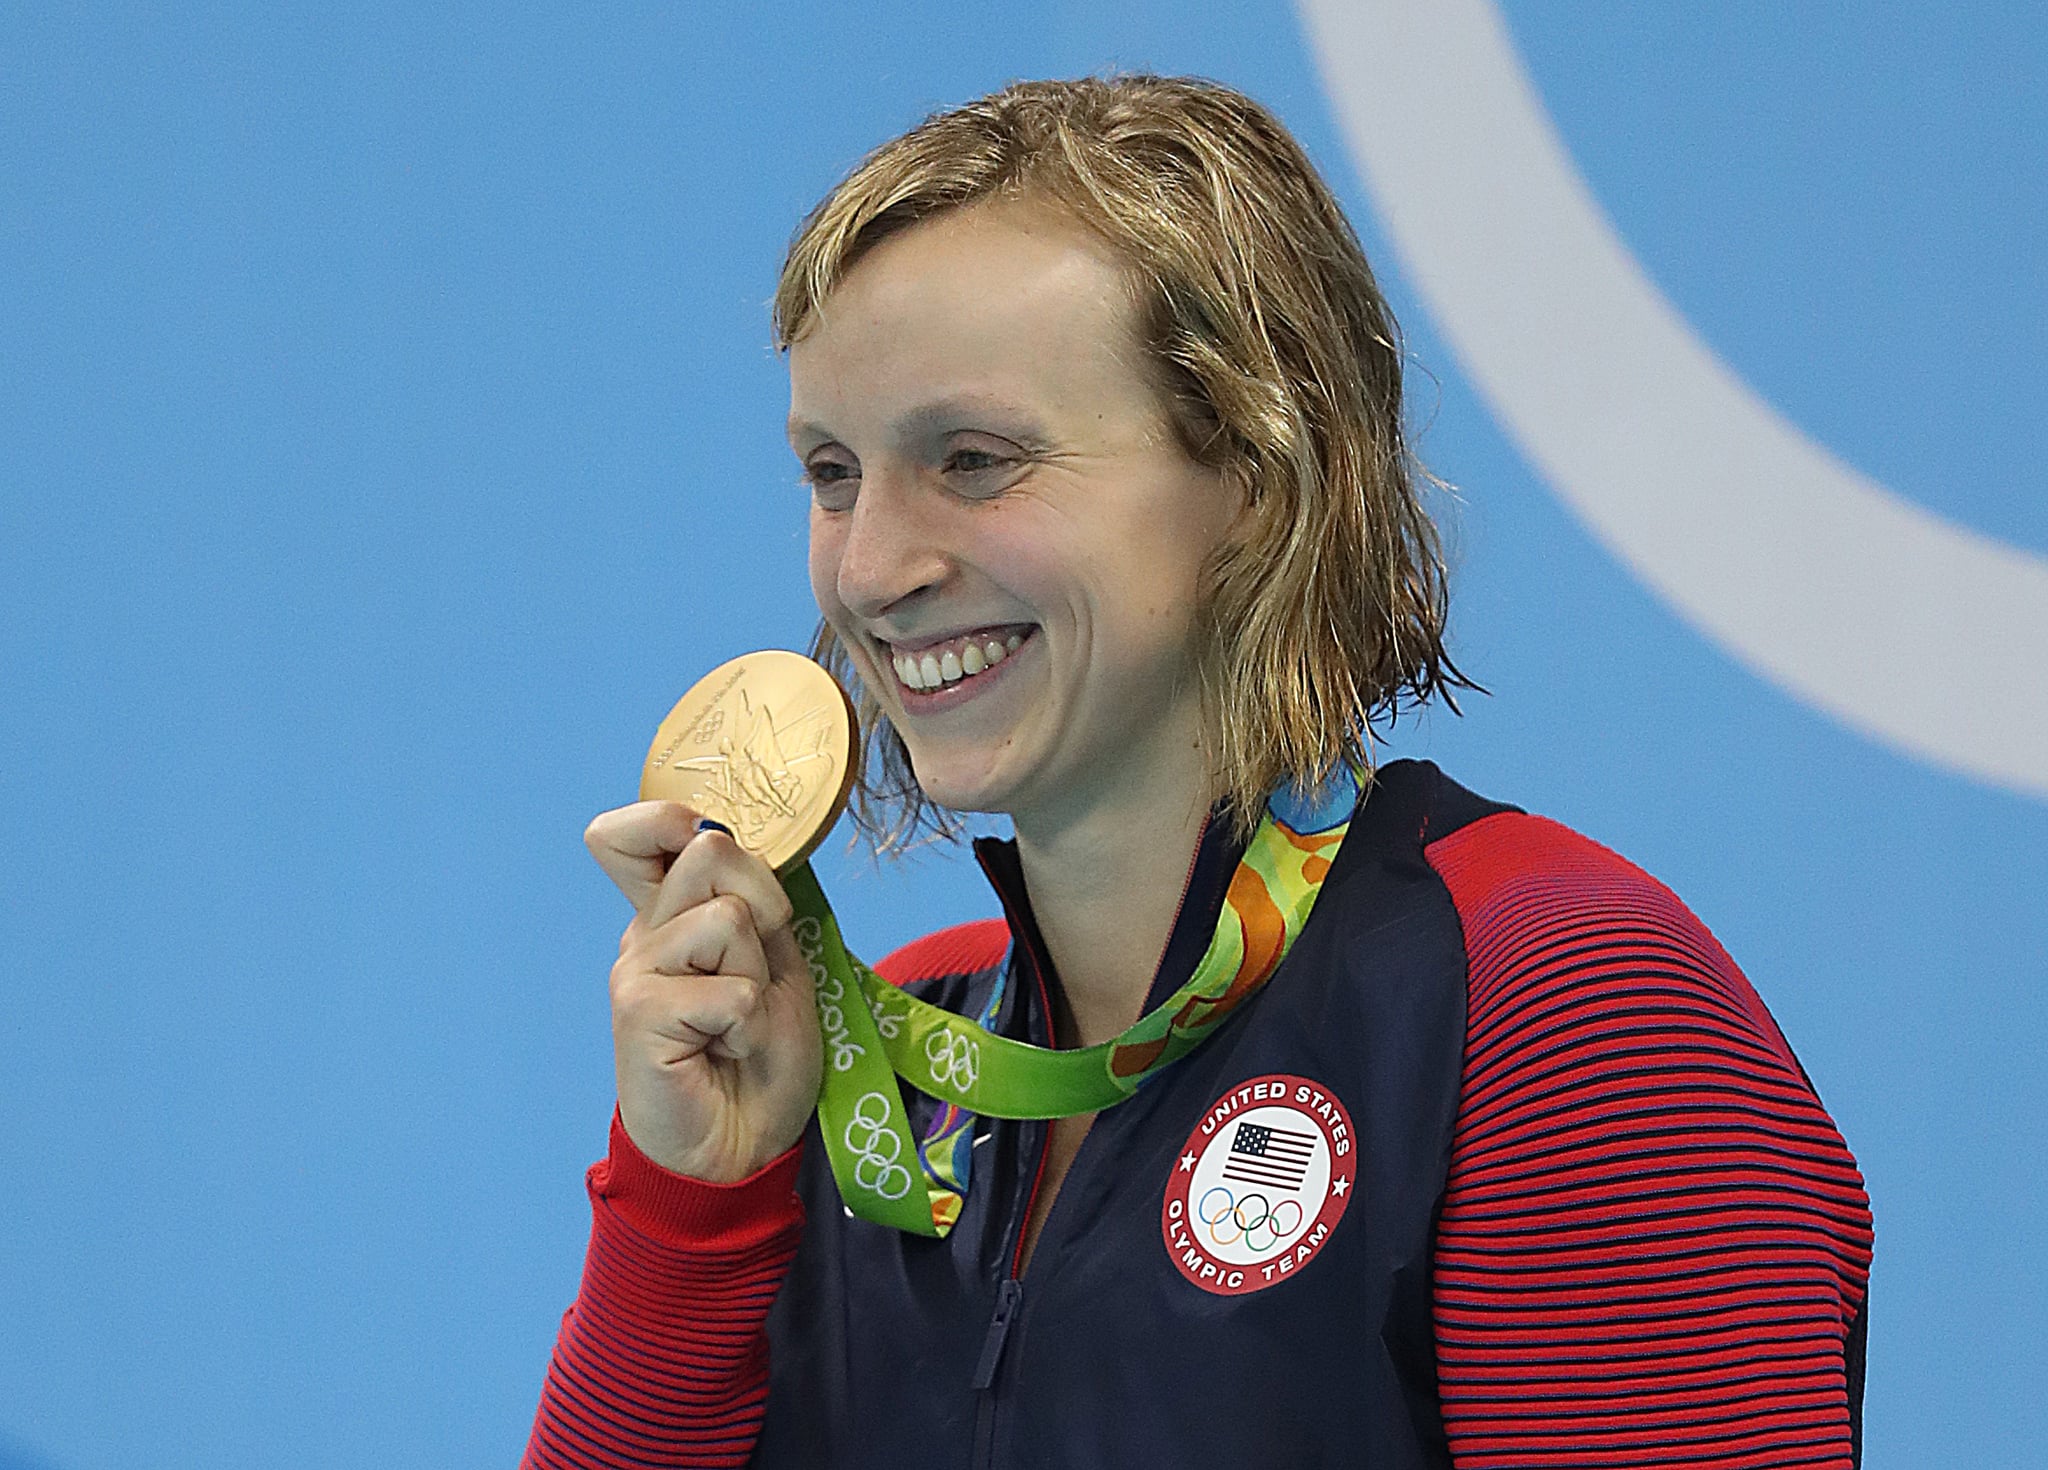 RIO DE JANEIRO, BRAZIL - AUGUST 12: A tearful Katie Ledecky of United States is seen on the podium during her National anthem after the Women's 800m Freestyle final and winning gold on Day 7 of the Rio 2016 Olympic Games at the Olympic Aquatics Stadium on August 12, 2016 in Rio de Janeiro, Brazil. (Photo by Ian MacNicol/Getty Images)